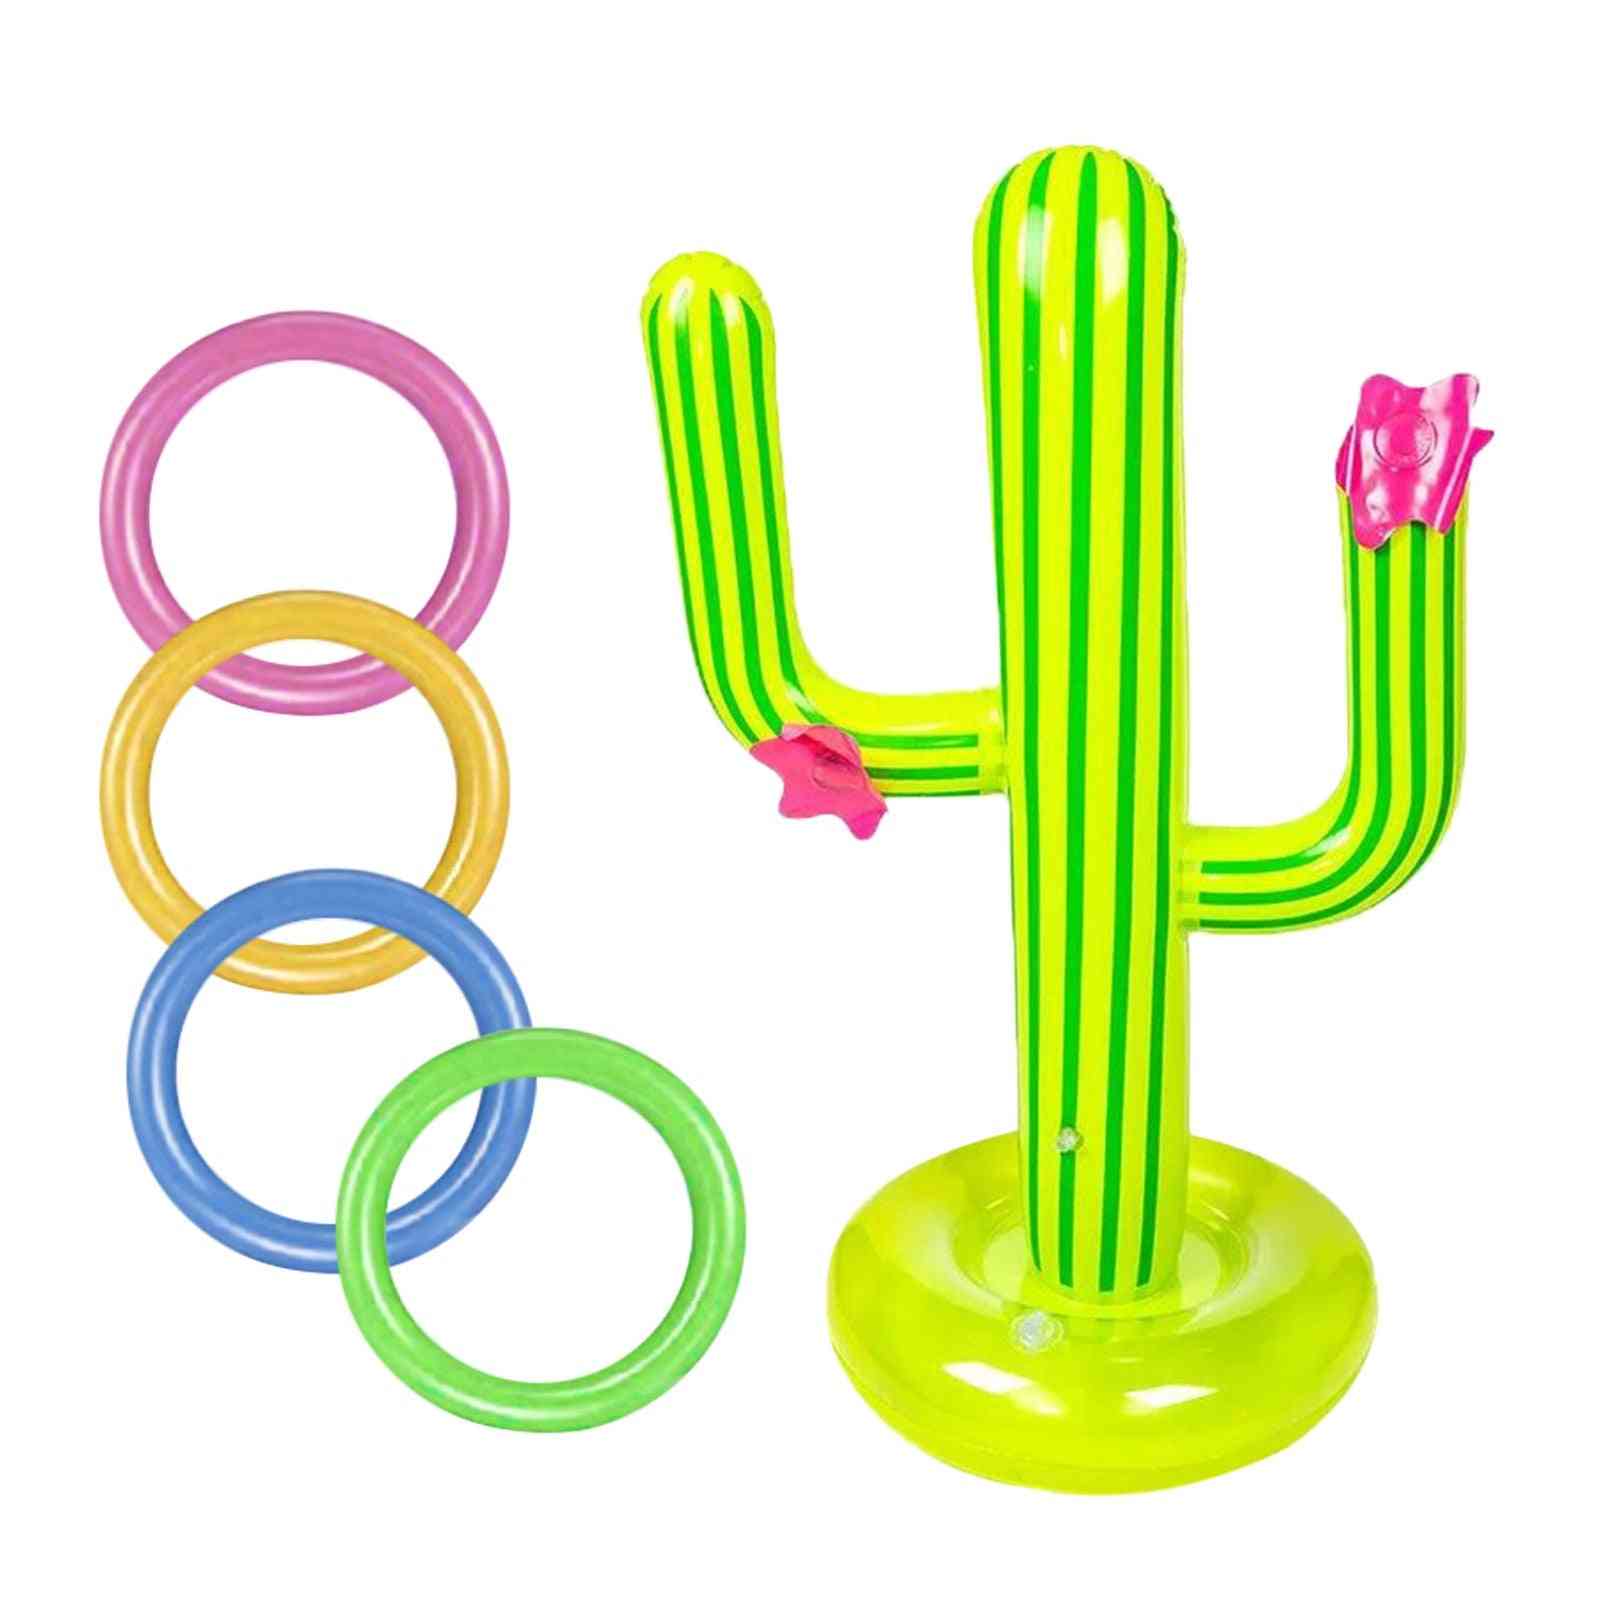 Summer Playing Swimming Pool Pvc Inflatable Cactus Pool Tossing Game Set Floating Beach Party Supplies